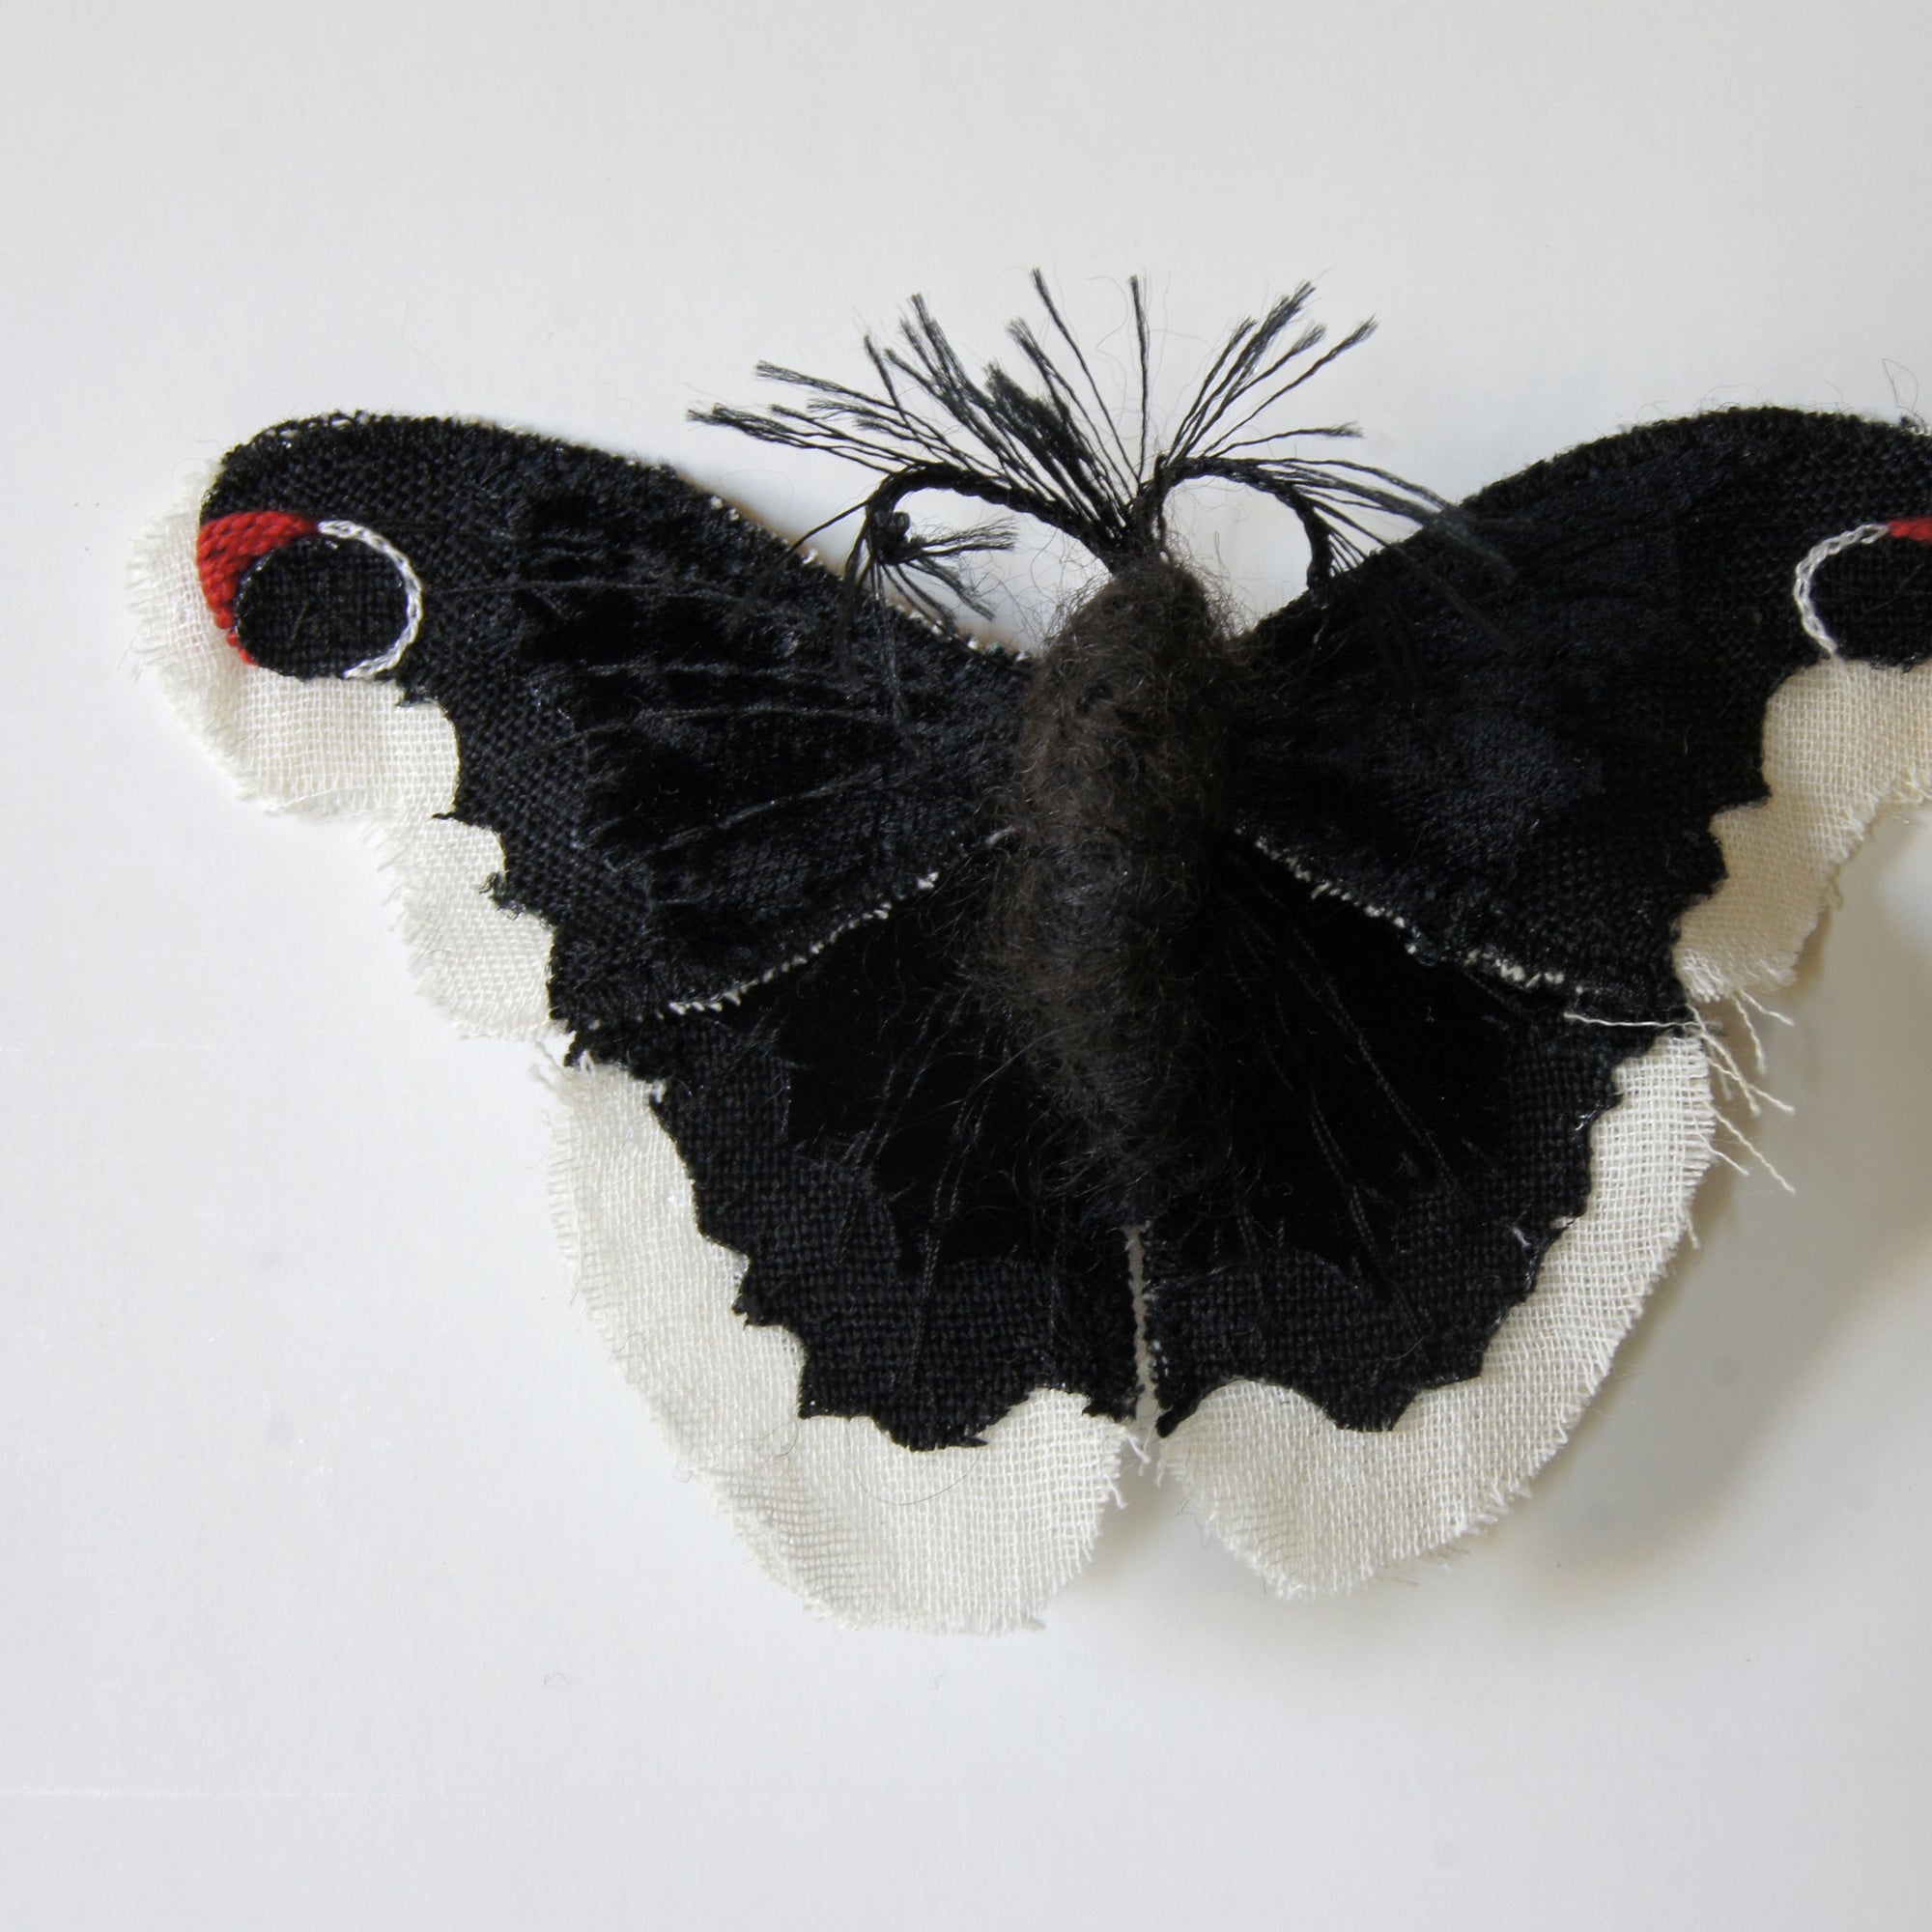 Promethea Silkmoth Brooch Created in Collaboration with Nuit Clothing Atelier